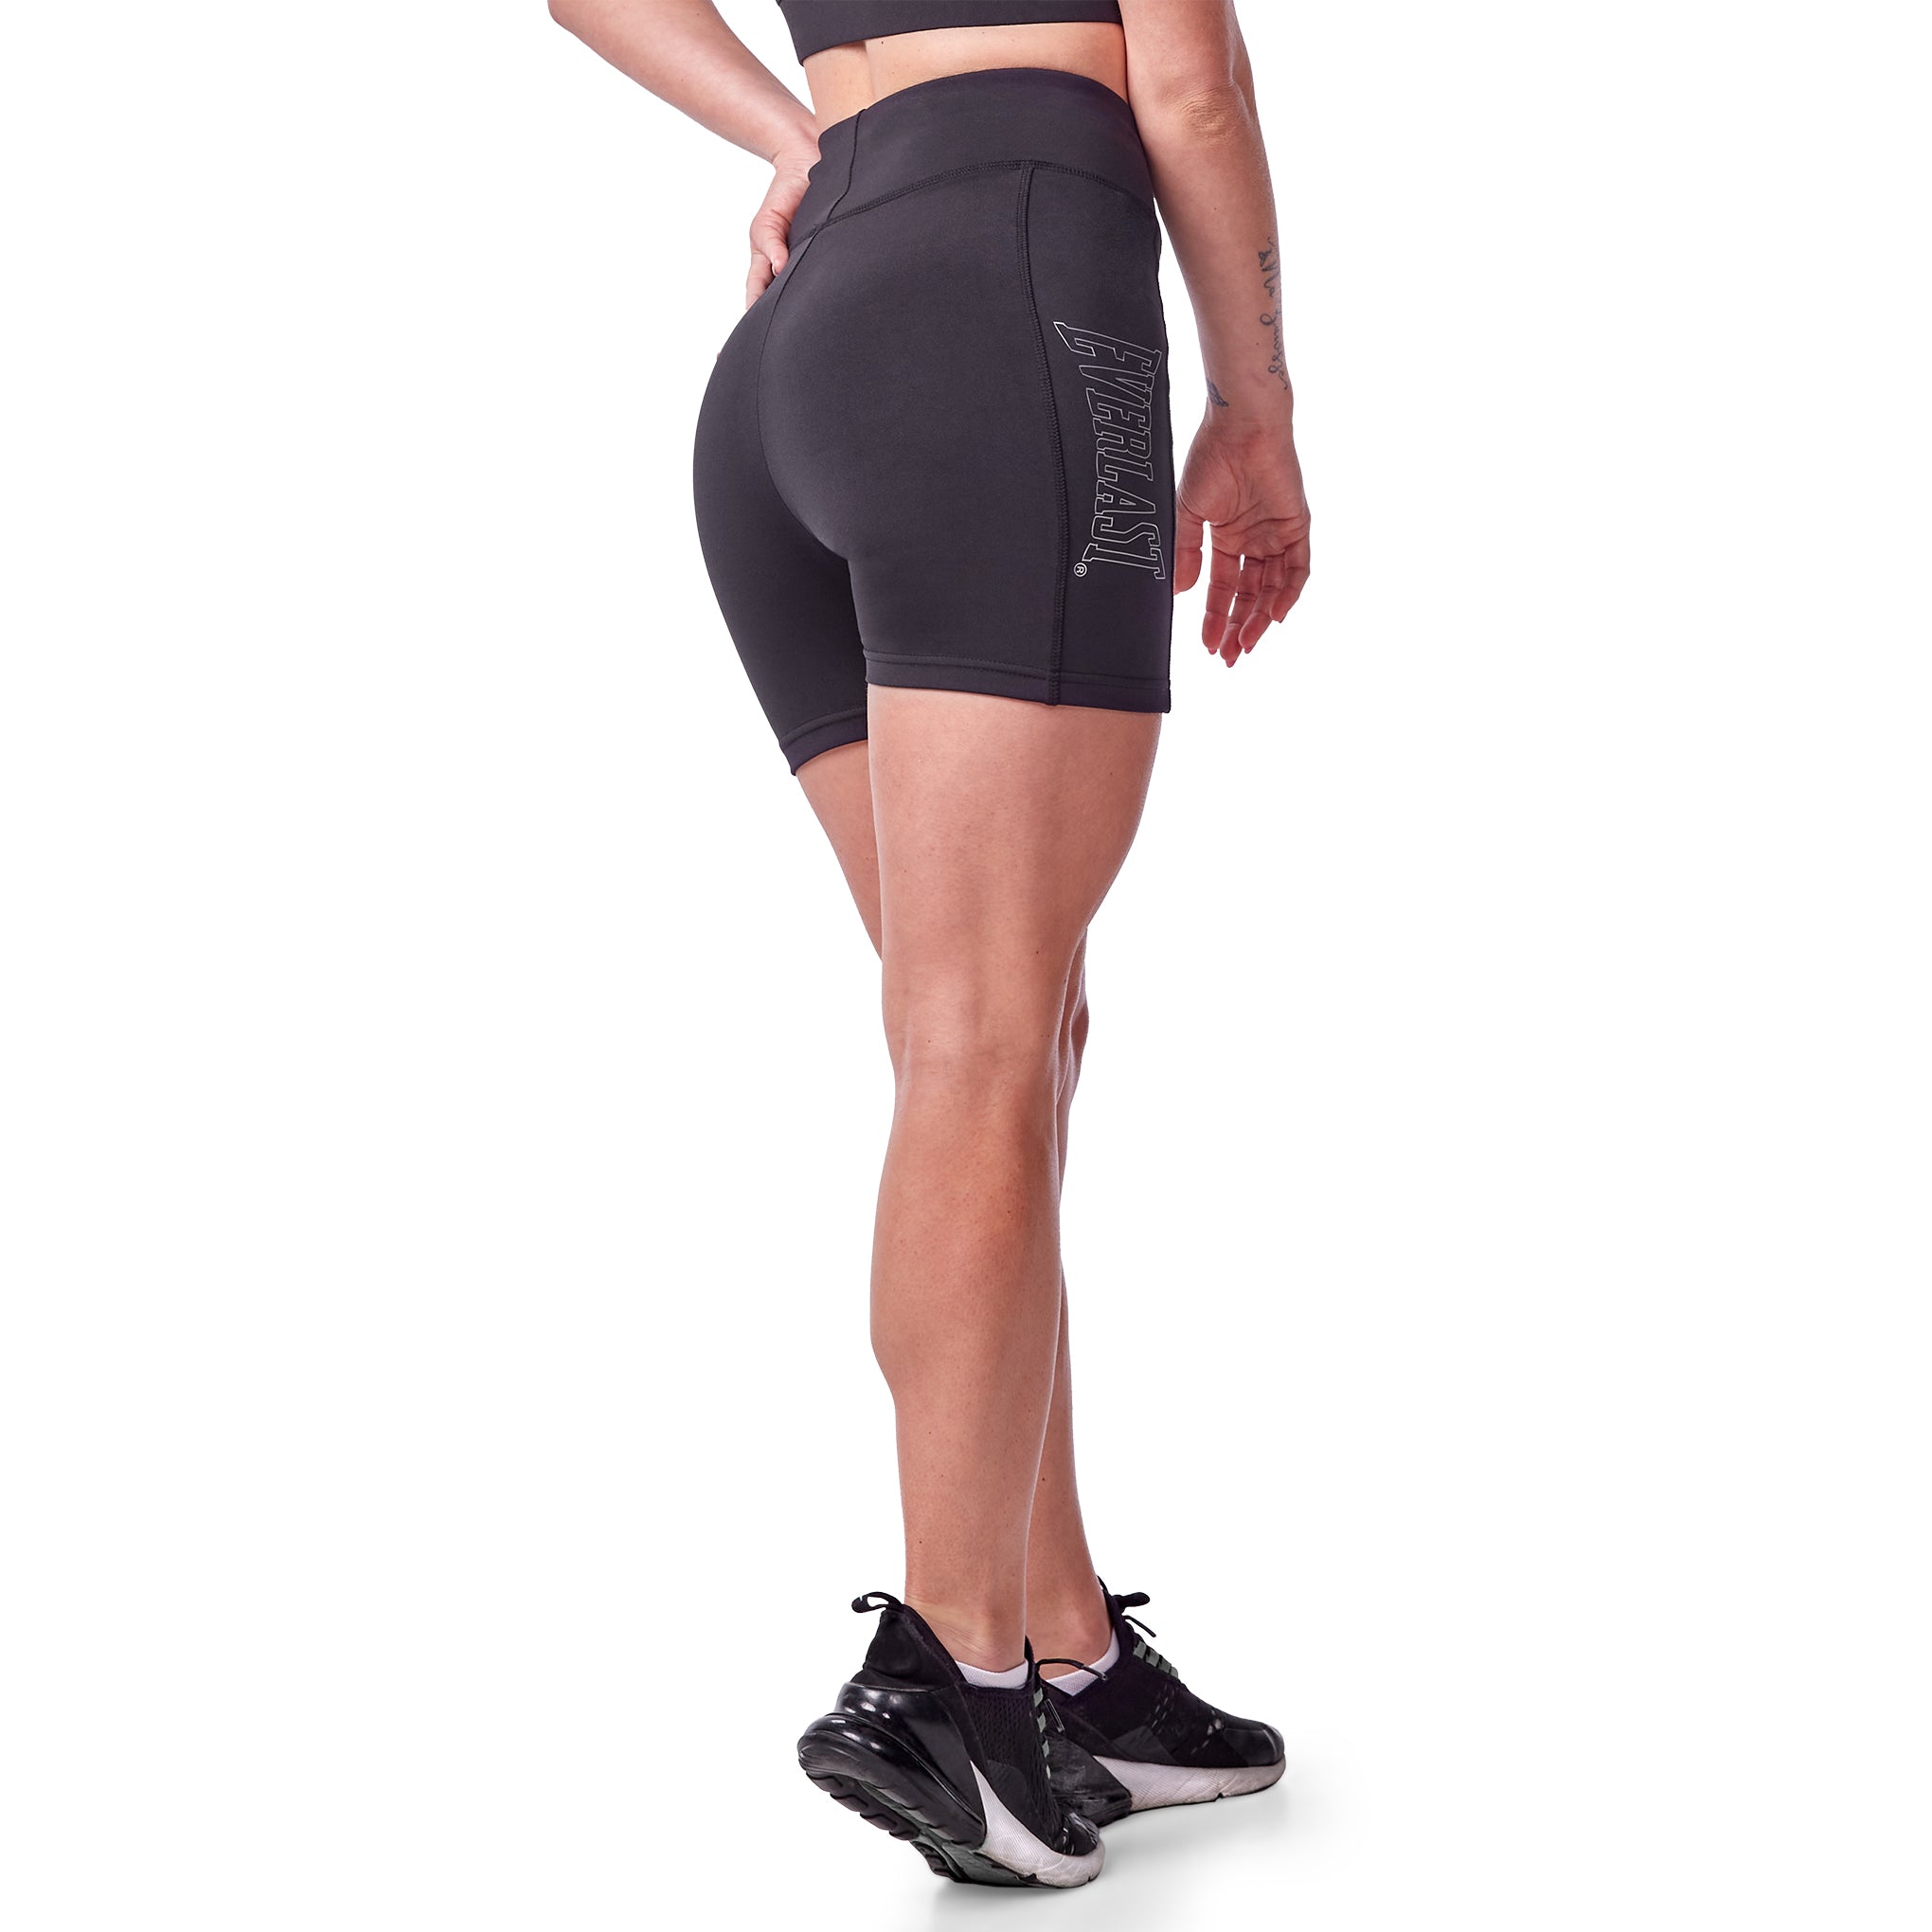 Womens Black Cycling Lycra Stretchy Short, Casual 3/4 Plain And Lace  Leggings | eBay